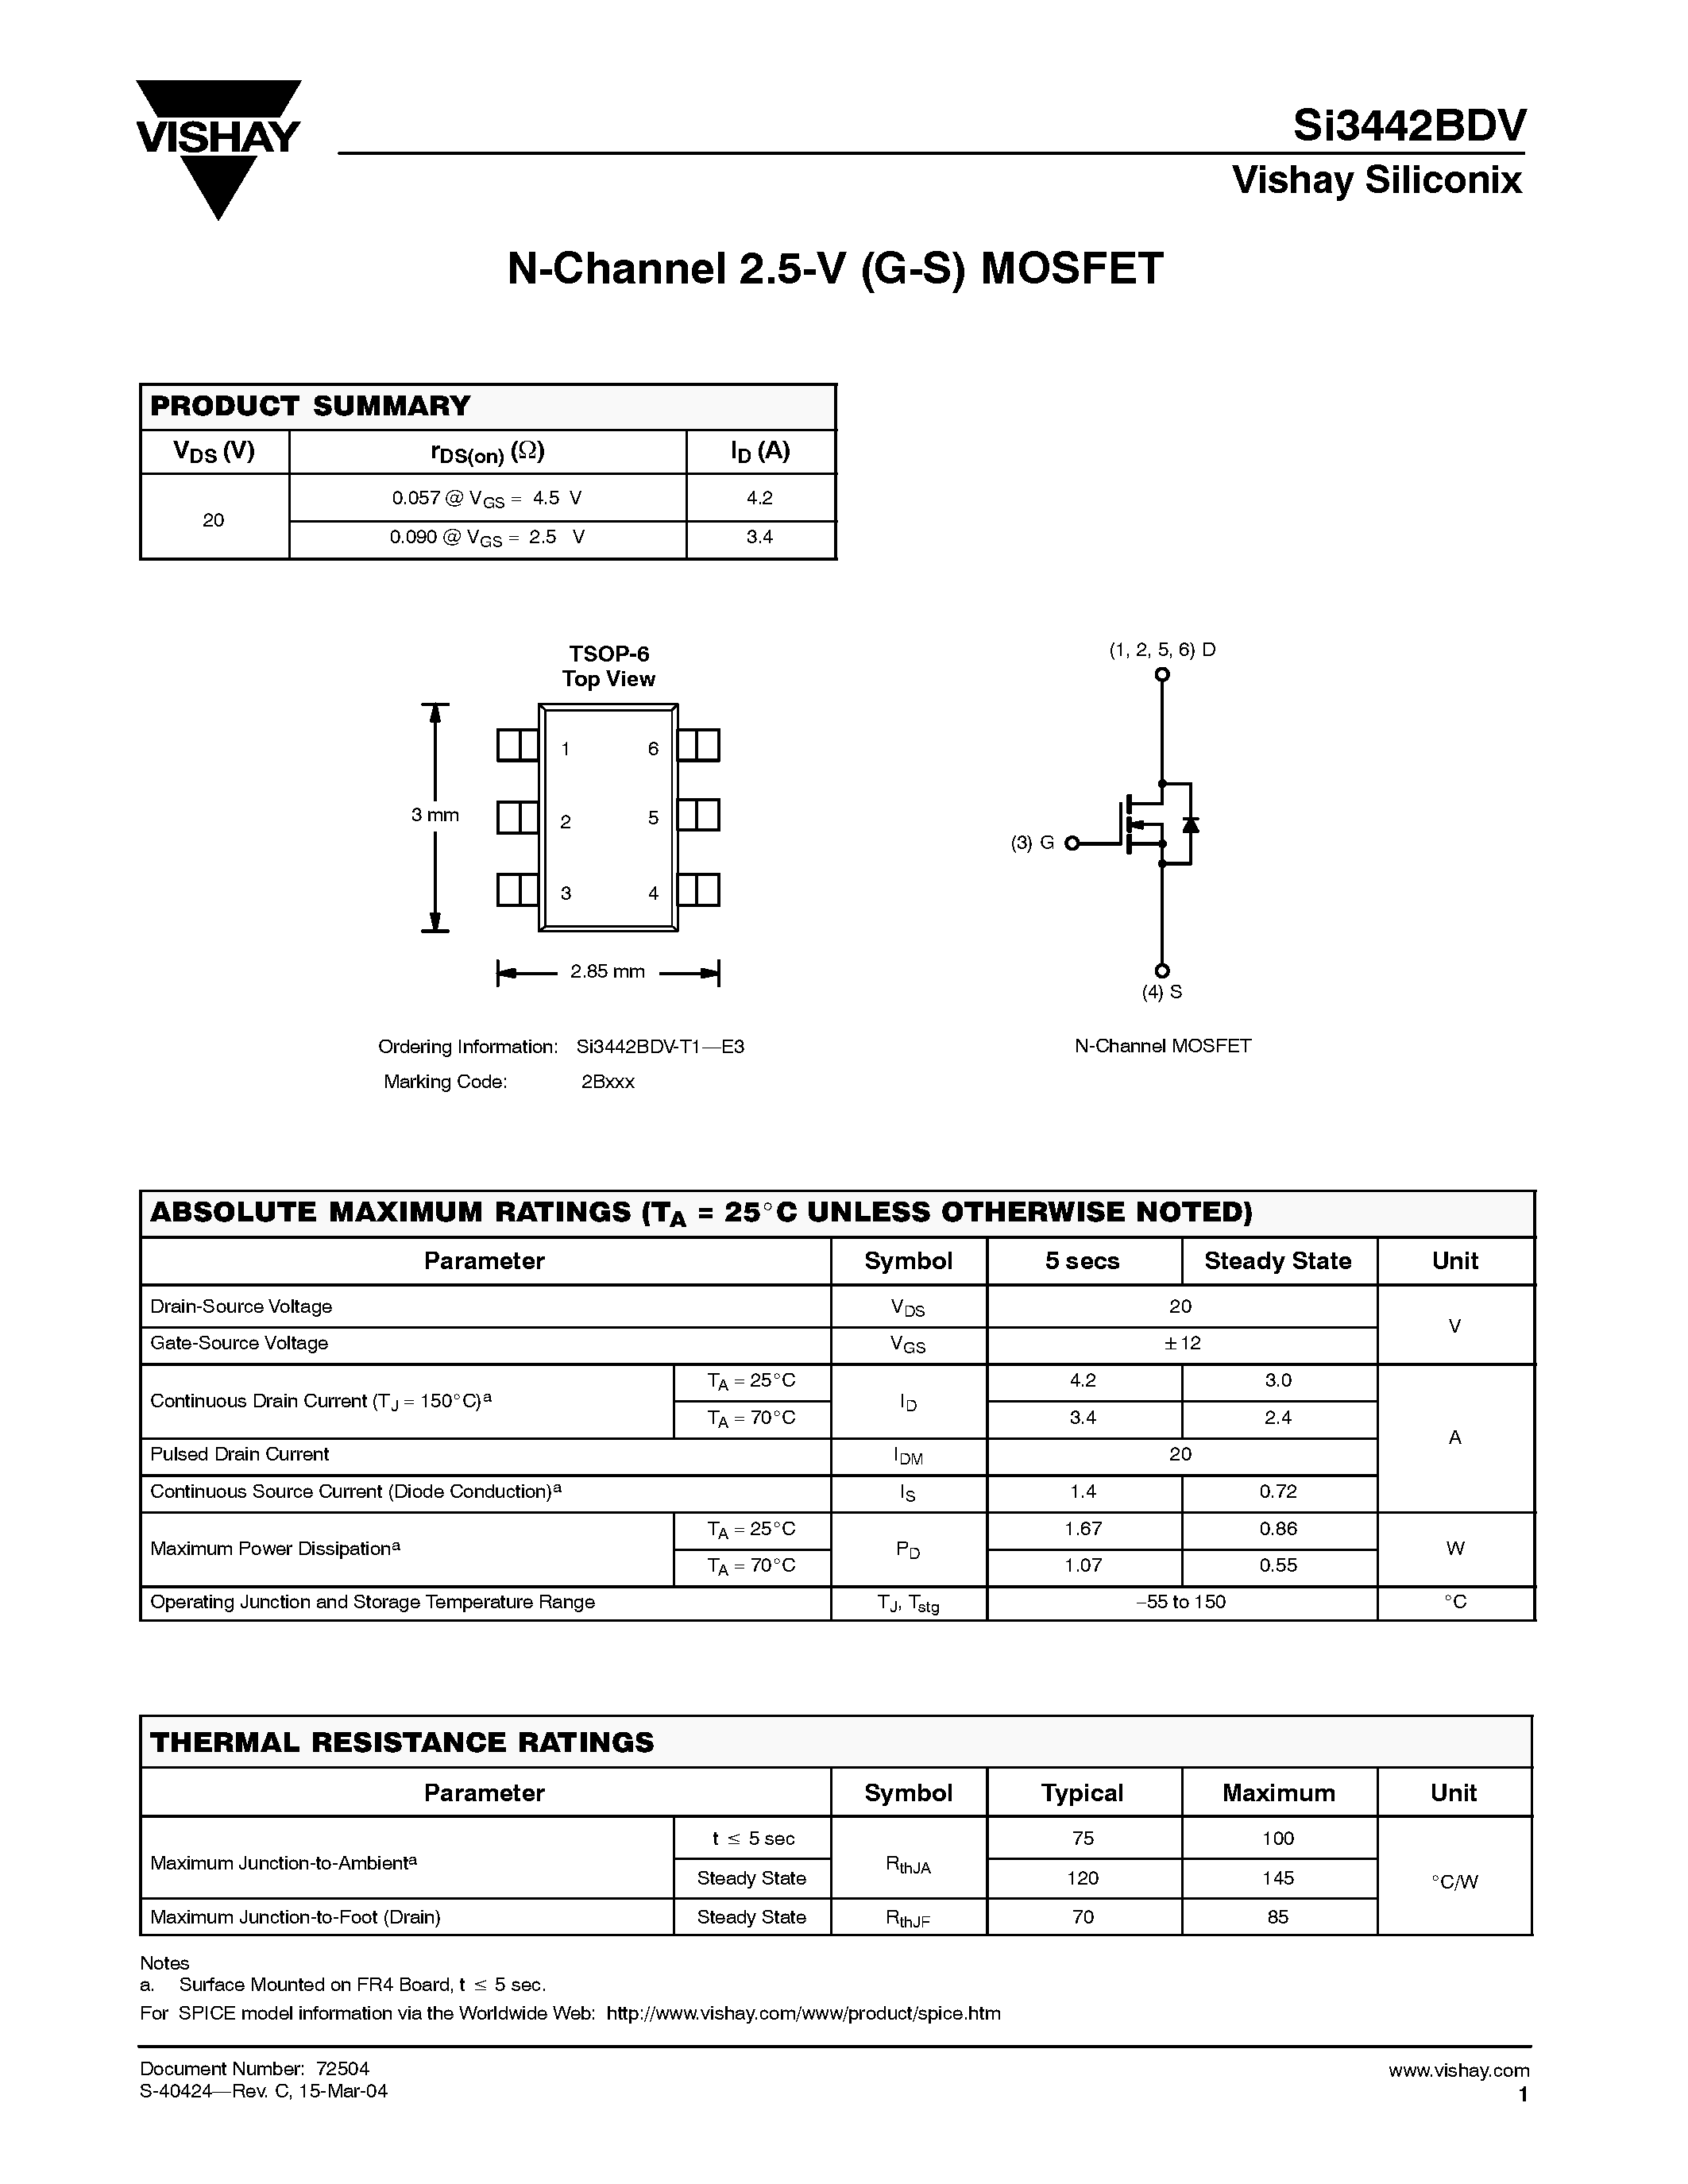 Datasheet SI3442BDV - N-Channel 2.5-V (G-S) MOSFET page 1